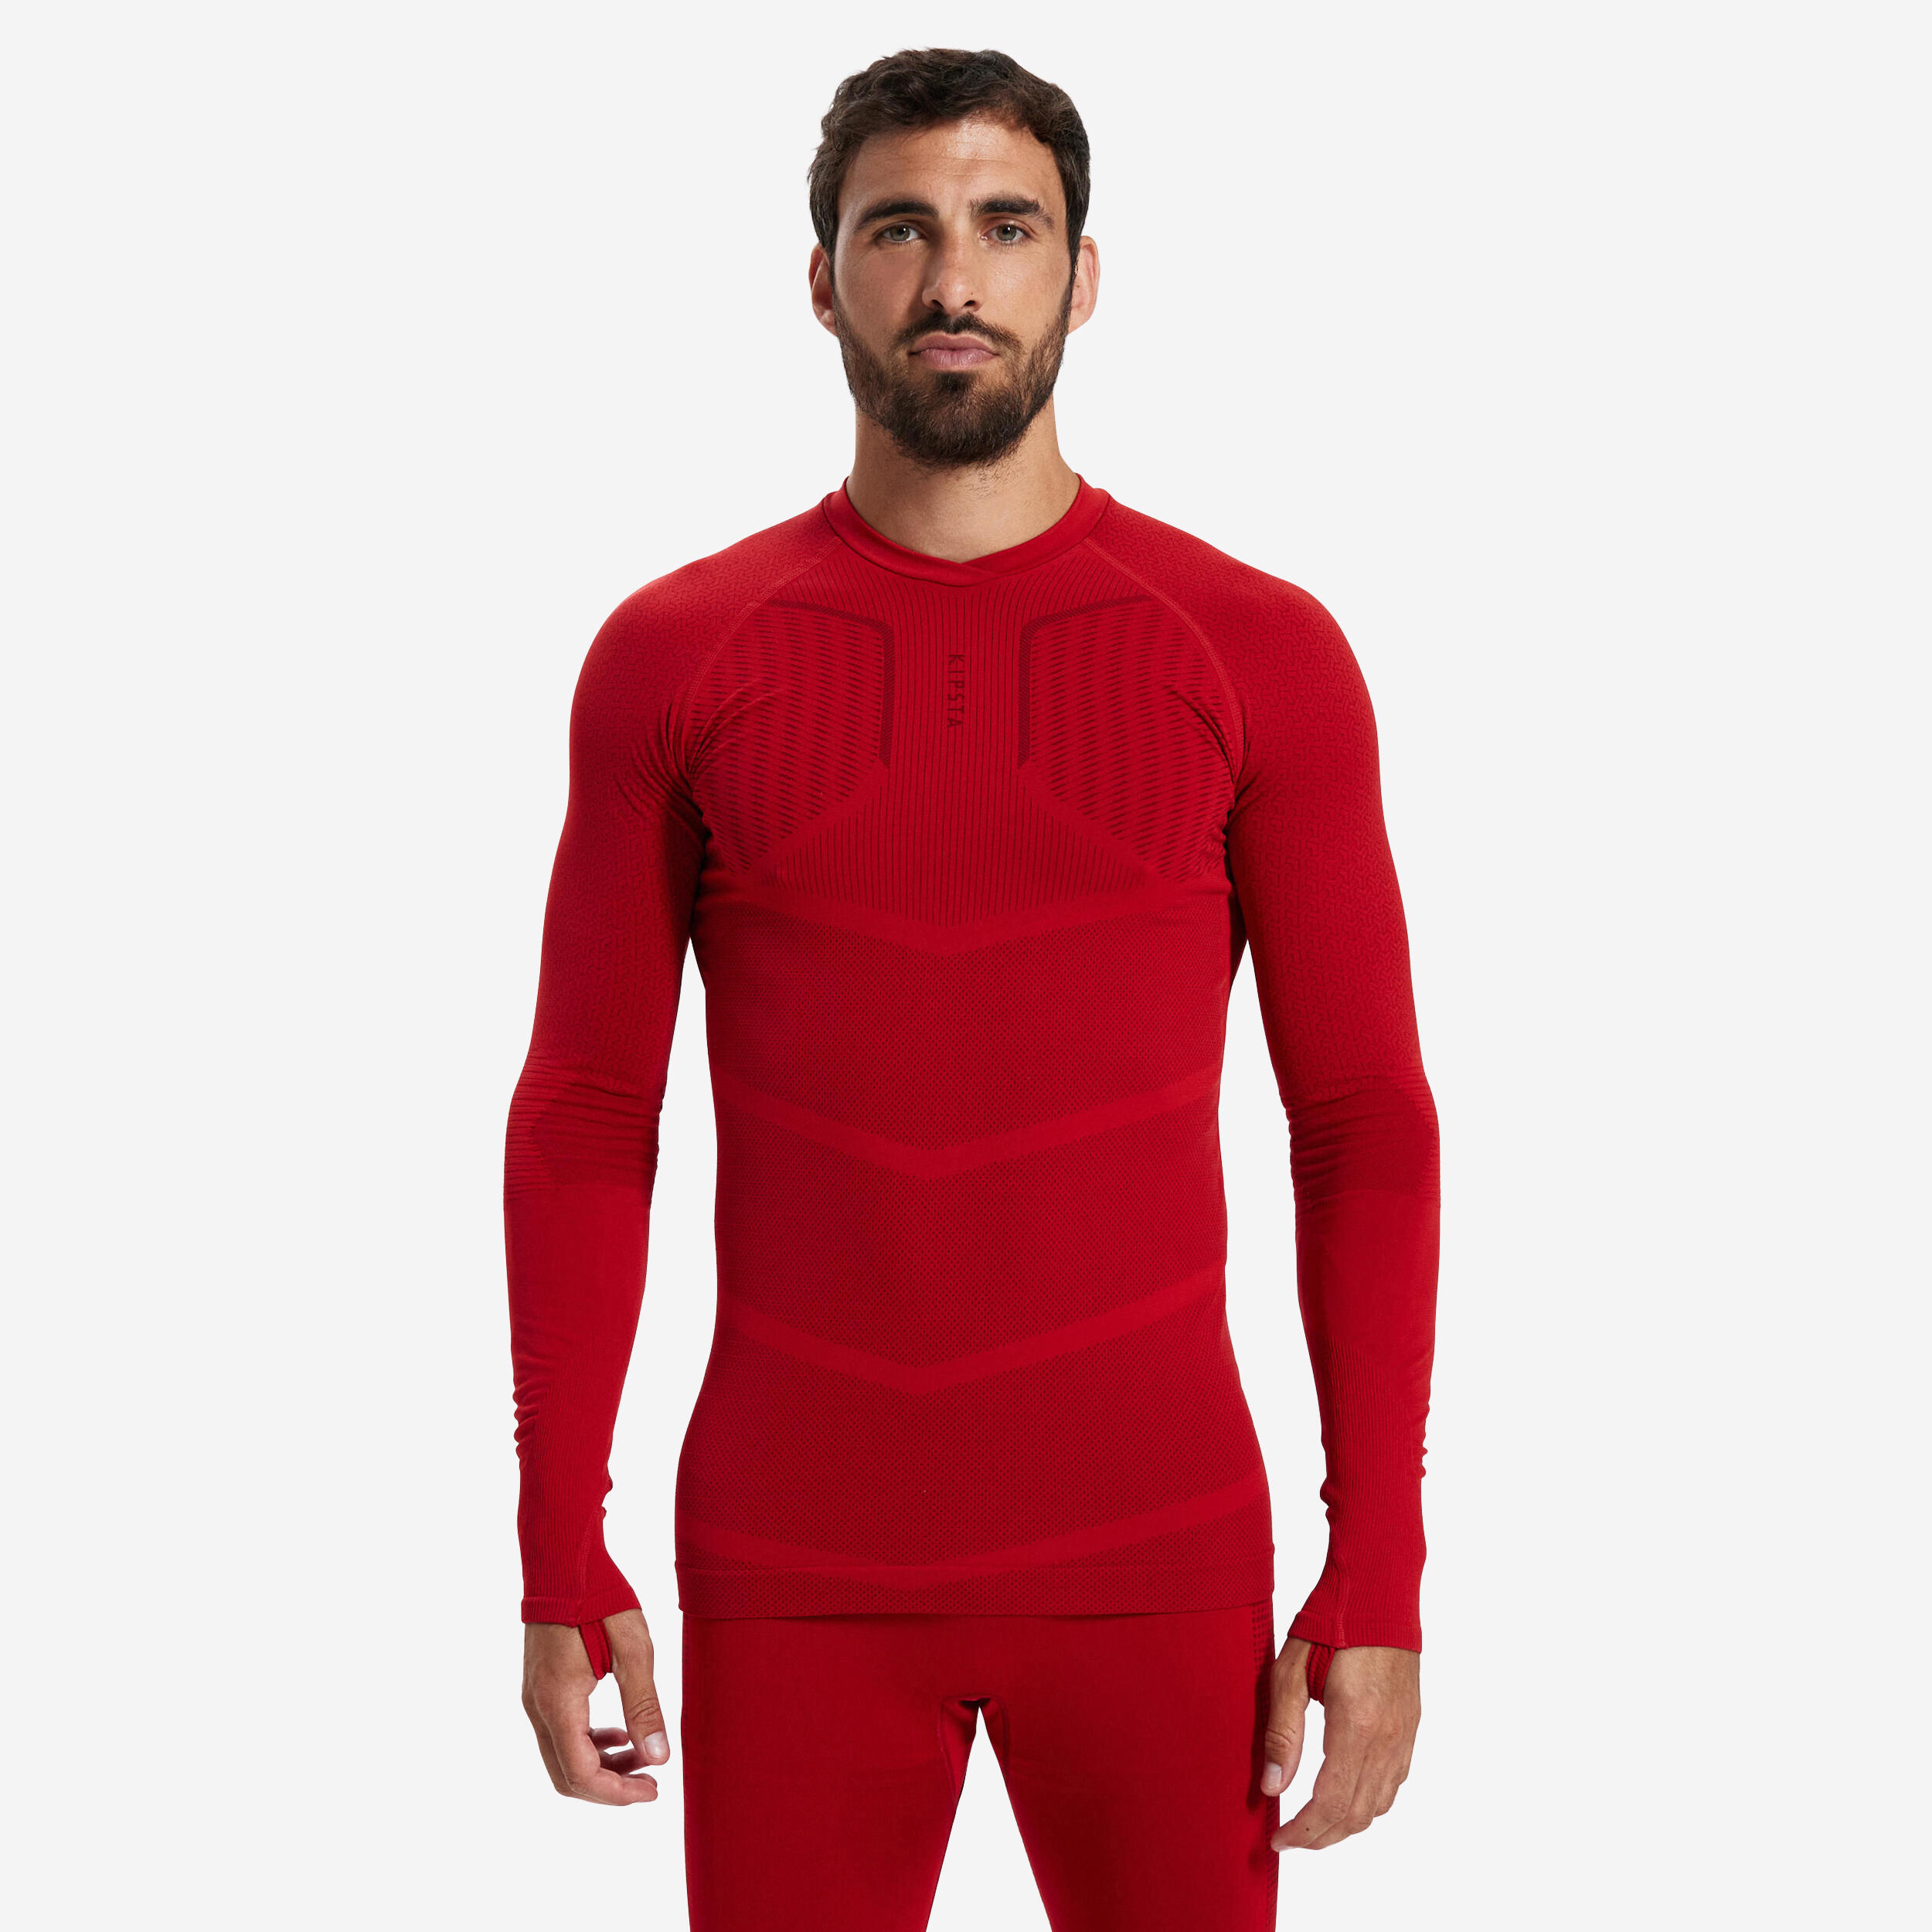 KIPSTA Adult Long-Sleeved Thermal Base Layer Top Keepdry 500 - Red